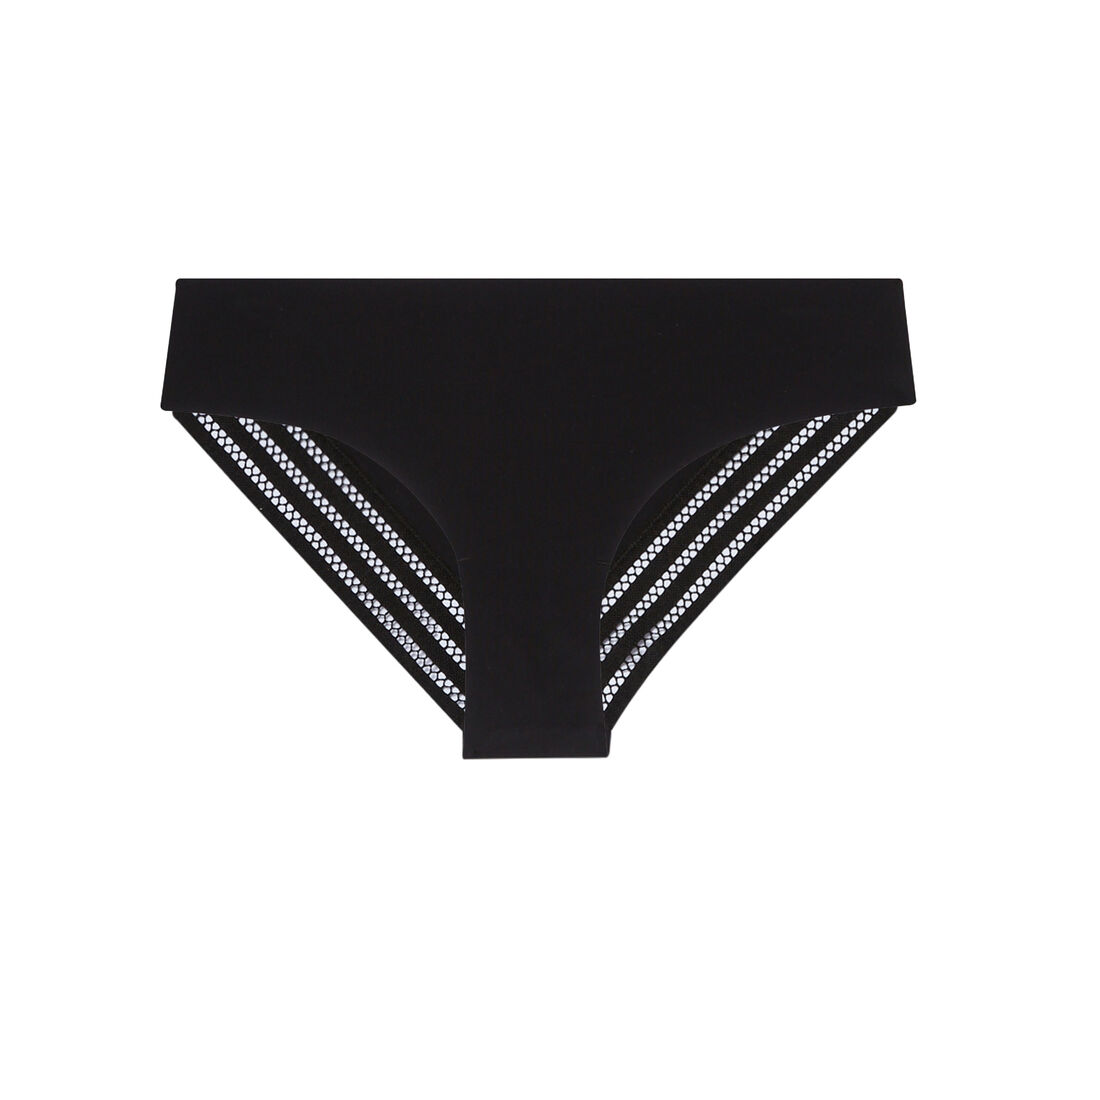 microfibre and graphic lace knickers - black;